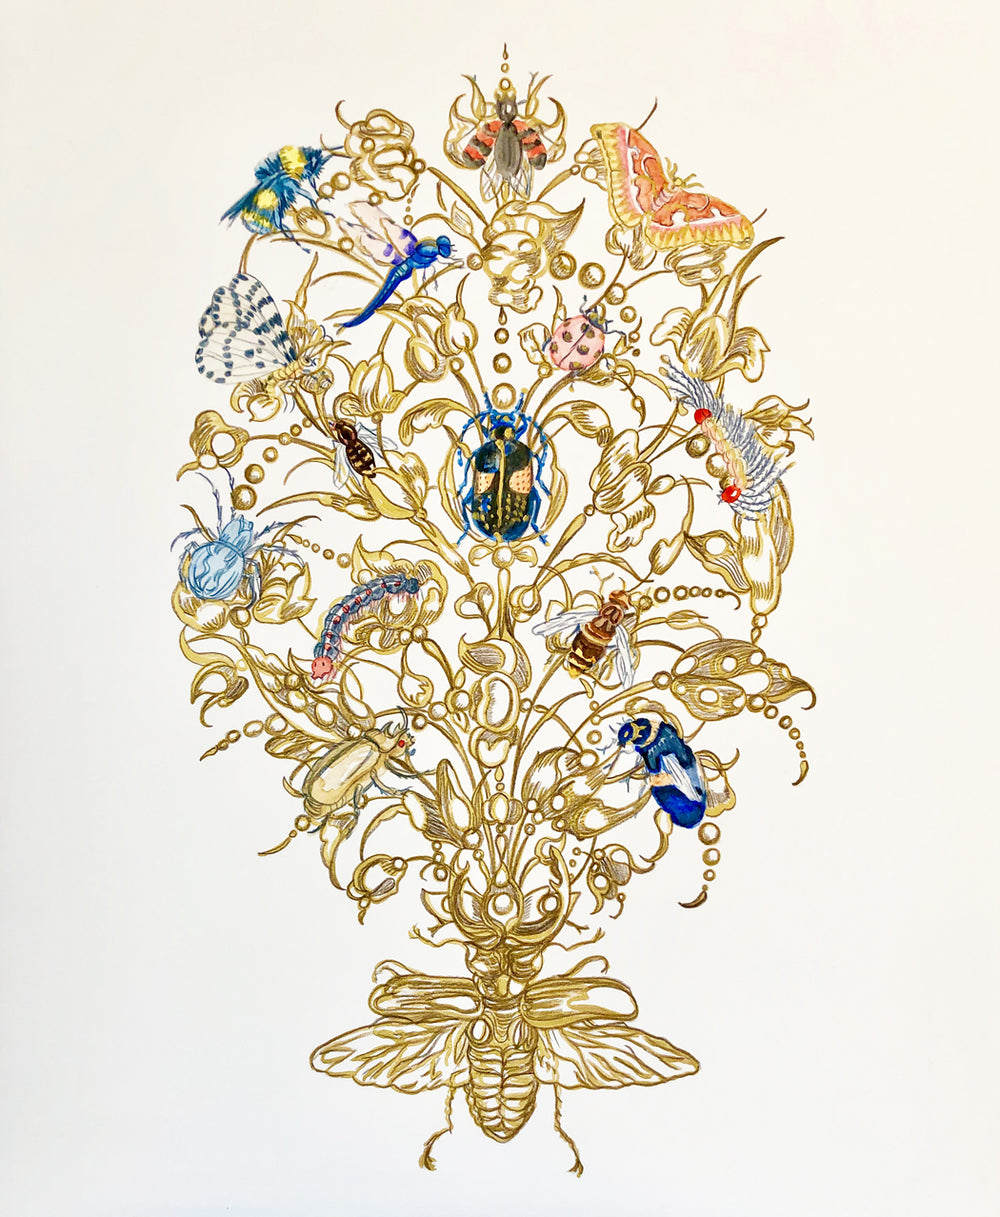 gold filigree painting of a floral bouquet, with various colorful insects throughout